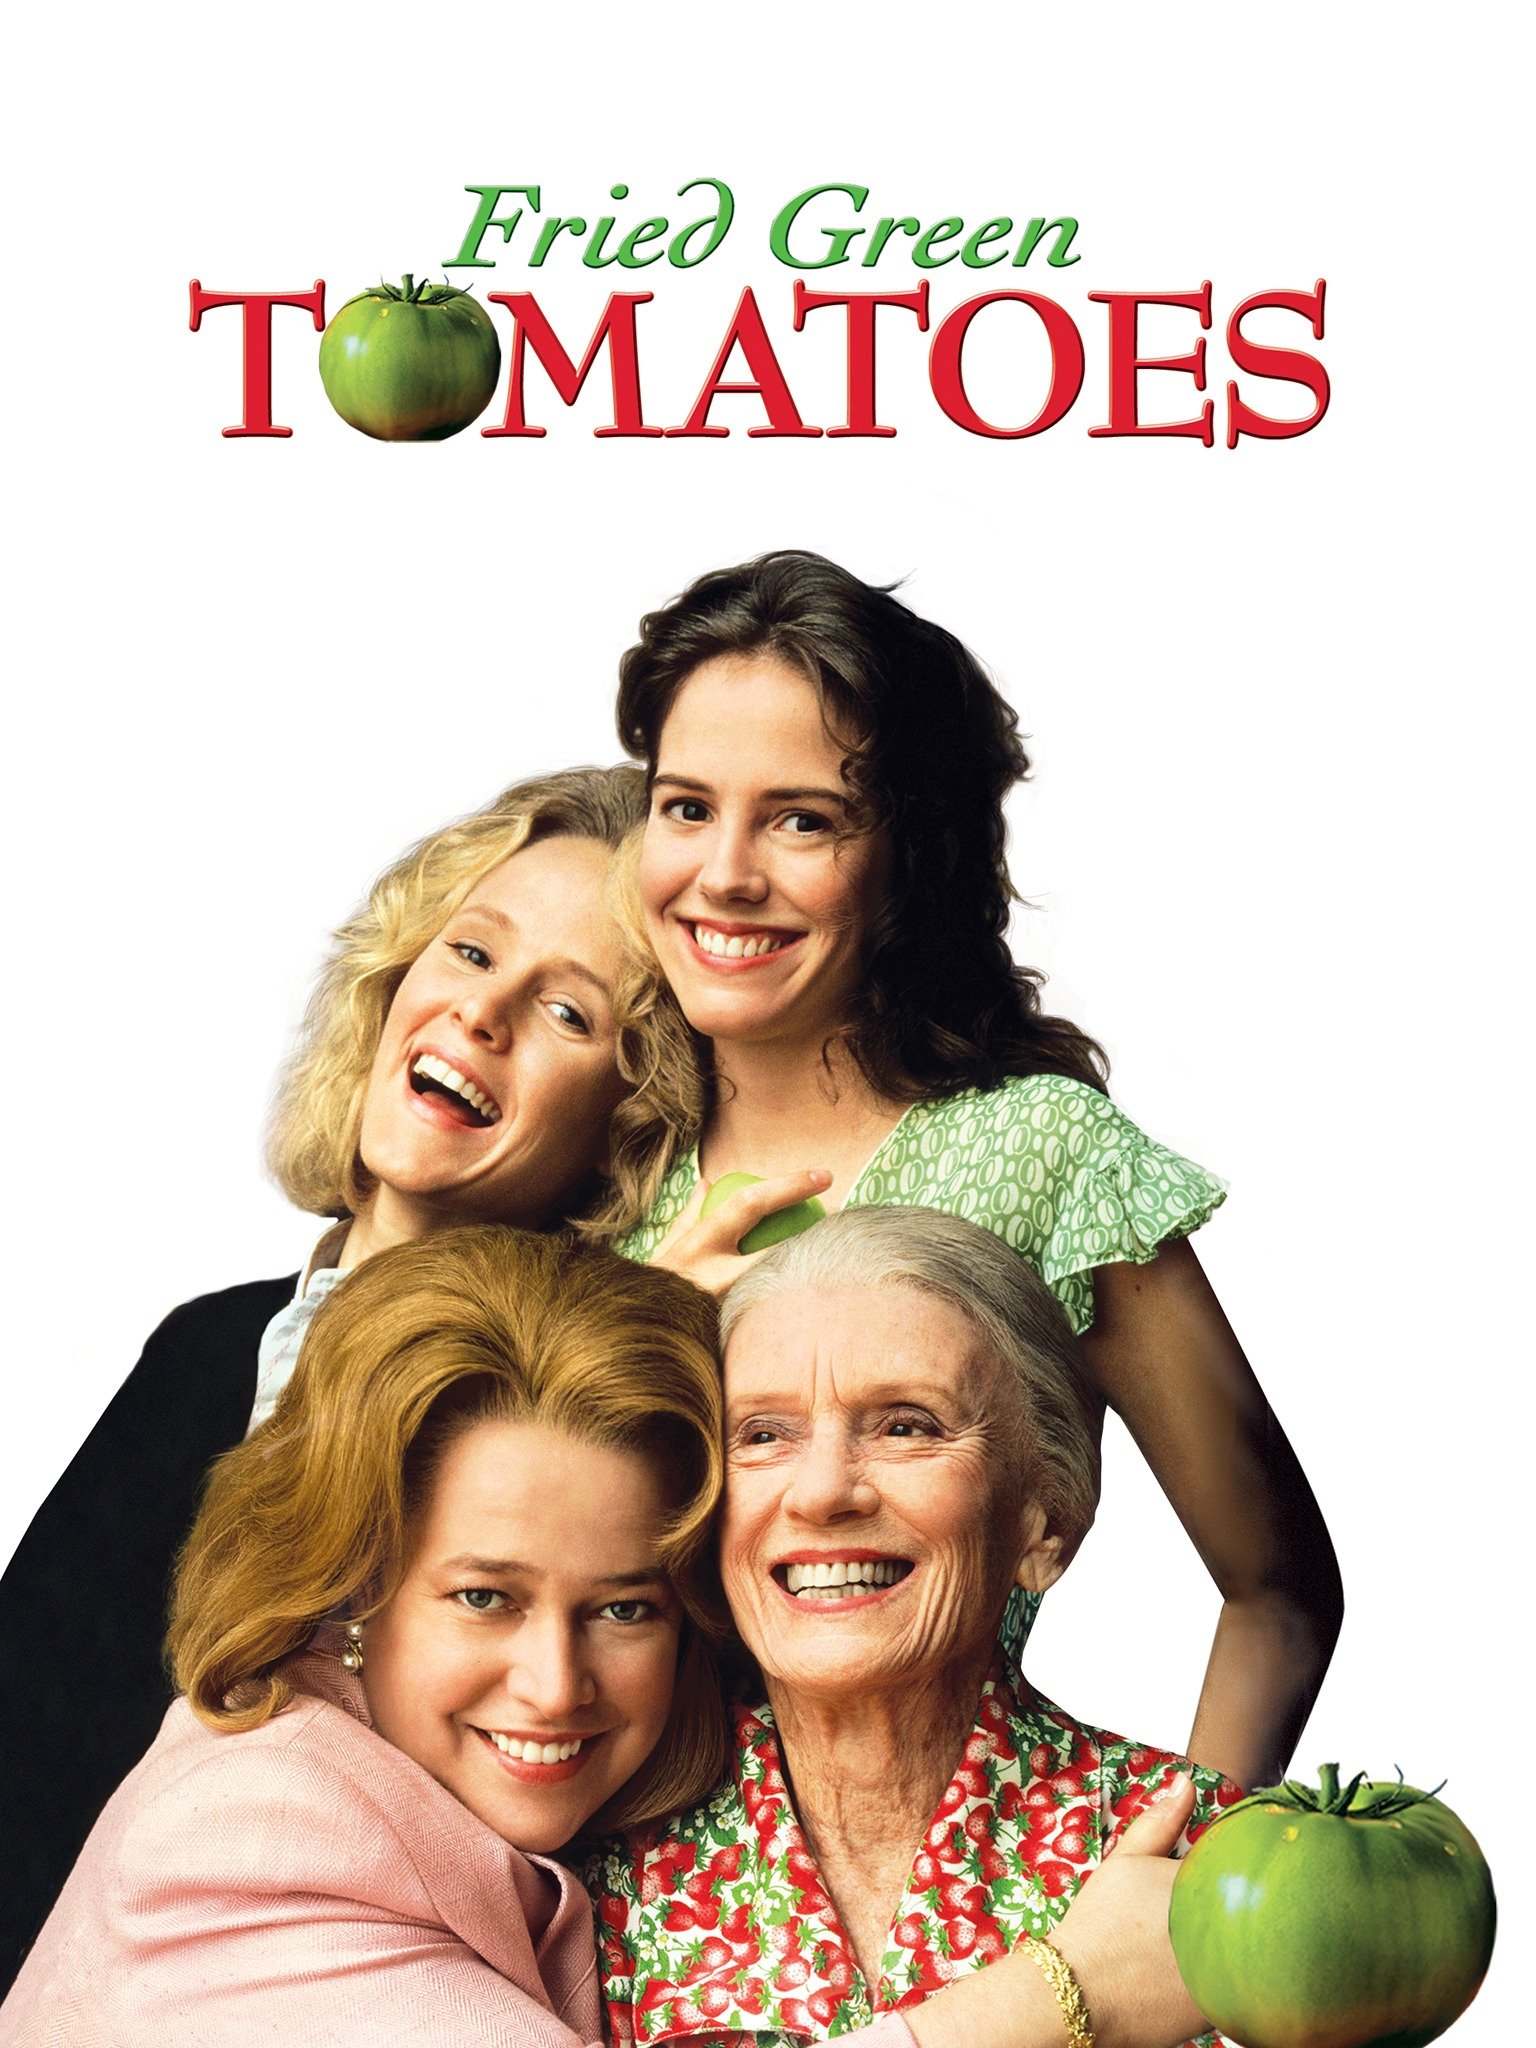 Fried Green Tomatoes - Movie Reviews